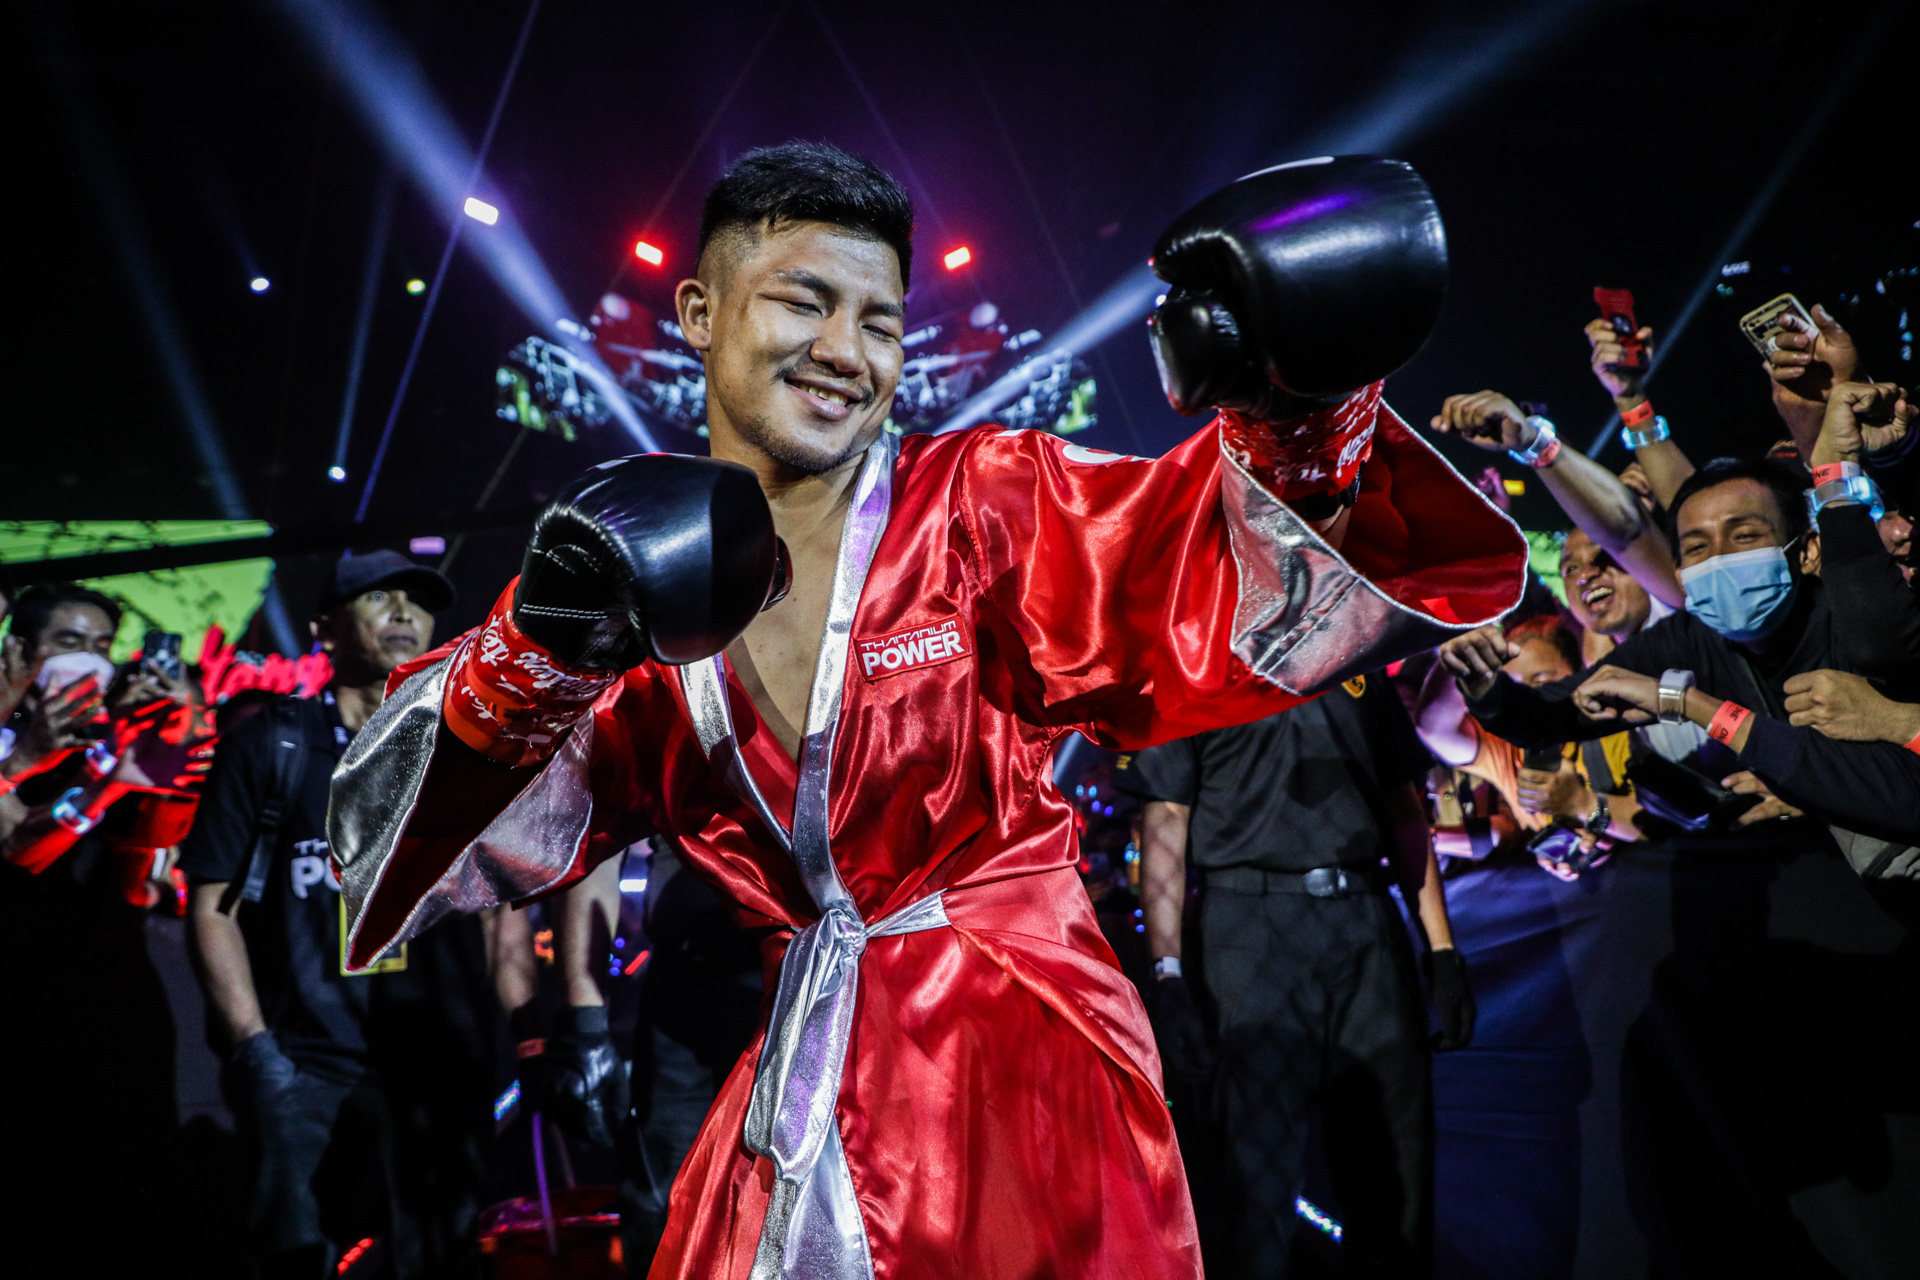 Rodtang Jitmuangnon dances to the ring for his bout with Jiduo Yibu at ONE Fight Night 6 in Bangkok.